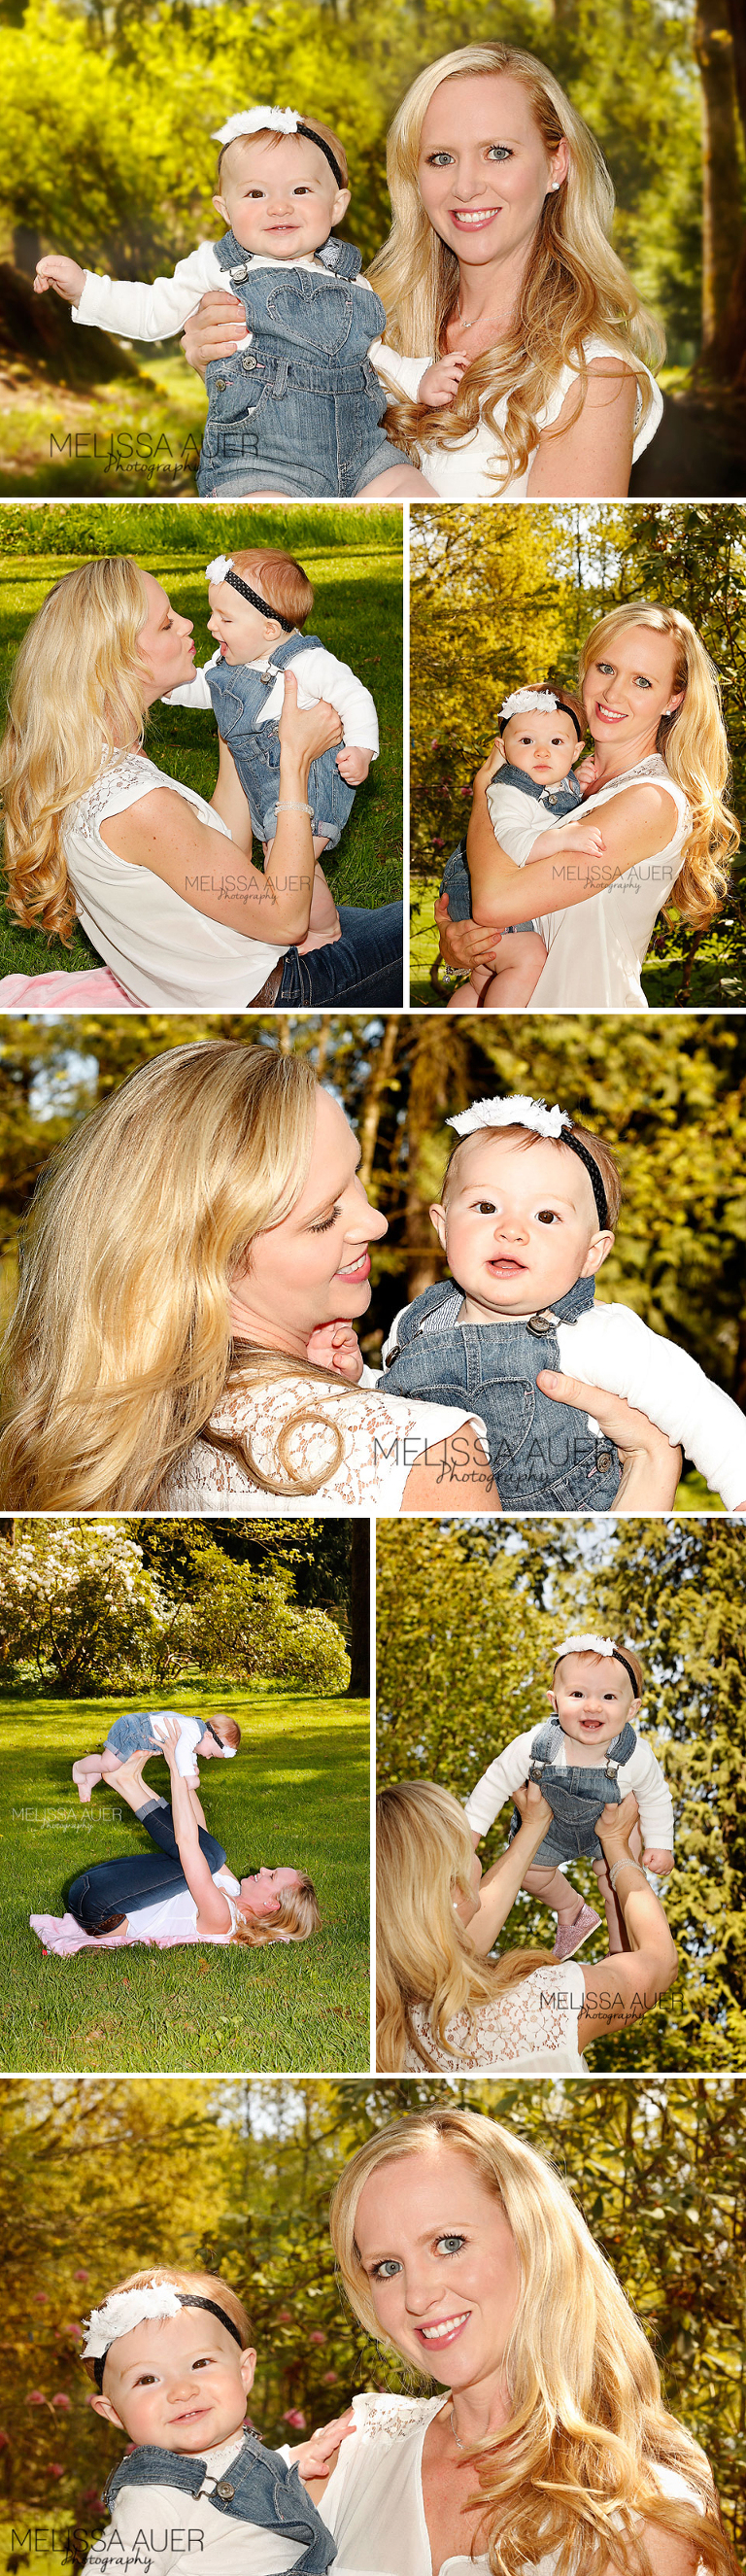 for the mamas / Melissa Auer Photography 2014